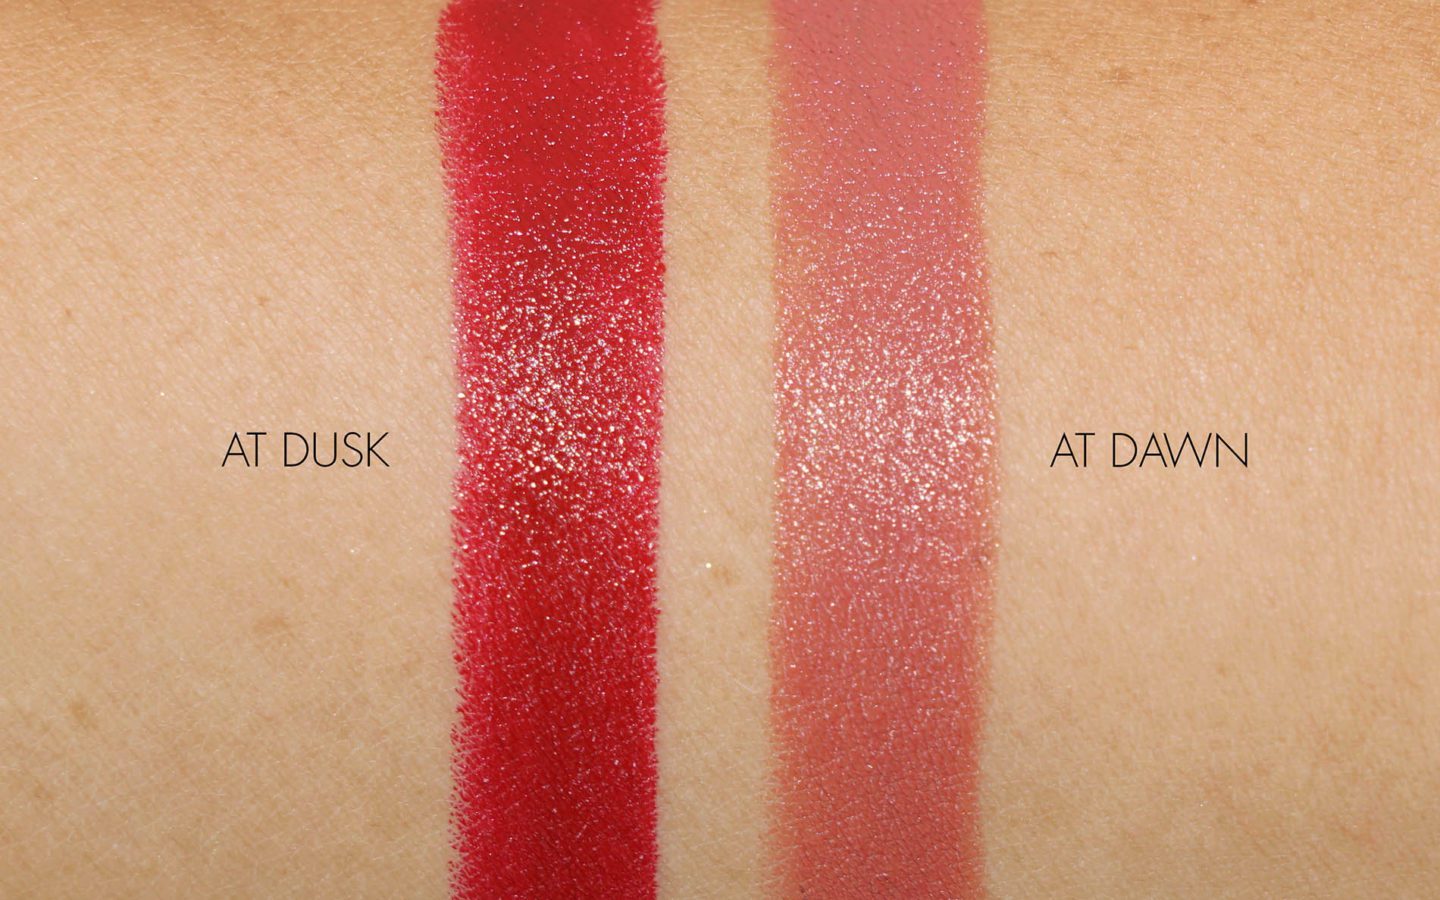 Hourglass Confession Refillable Lipstick Duo Sculpture At Dawn and At Dusk Swatches Sabrina